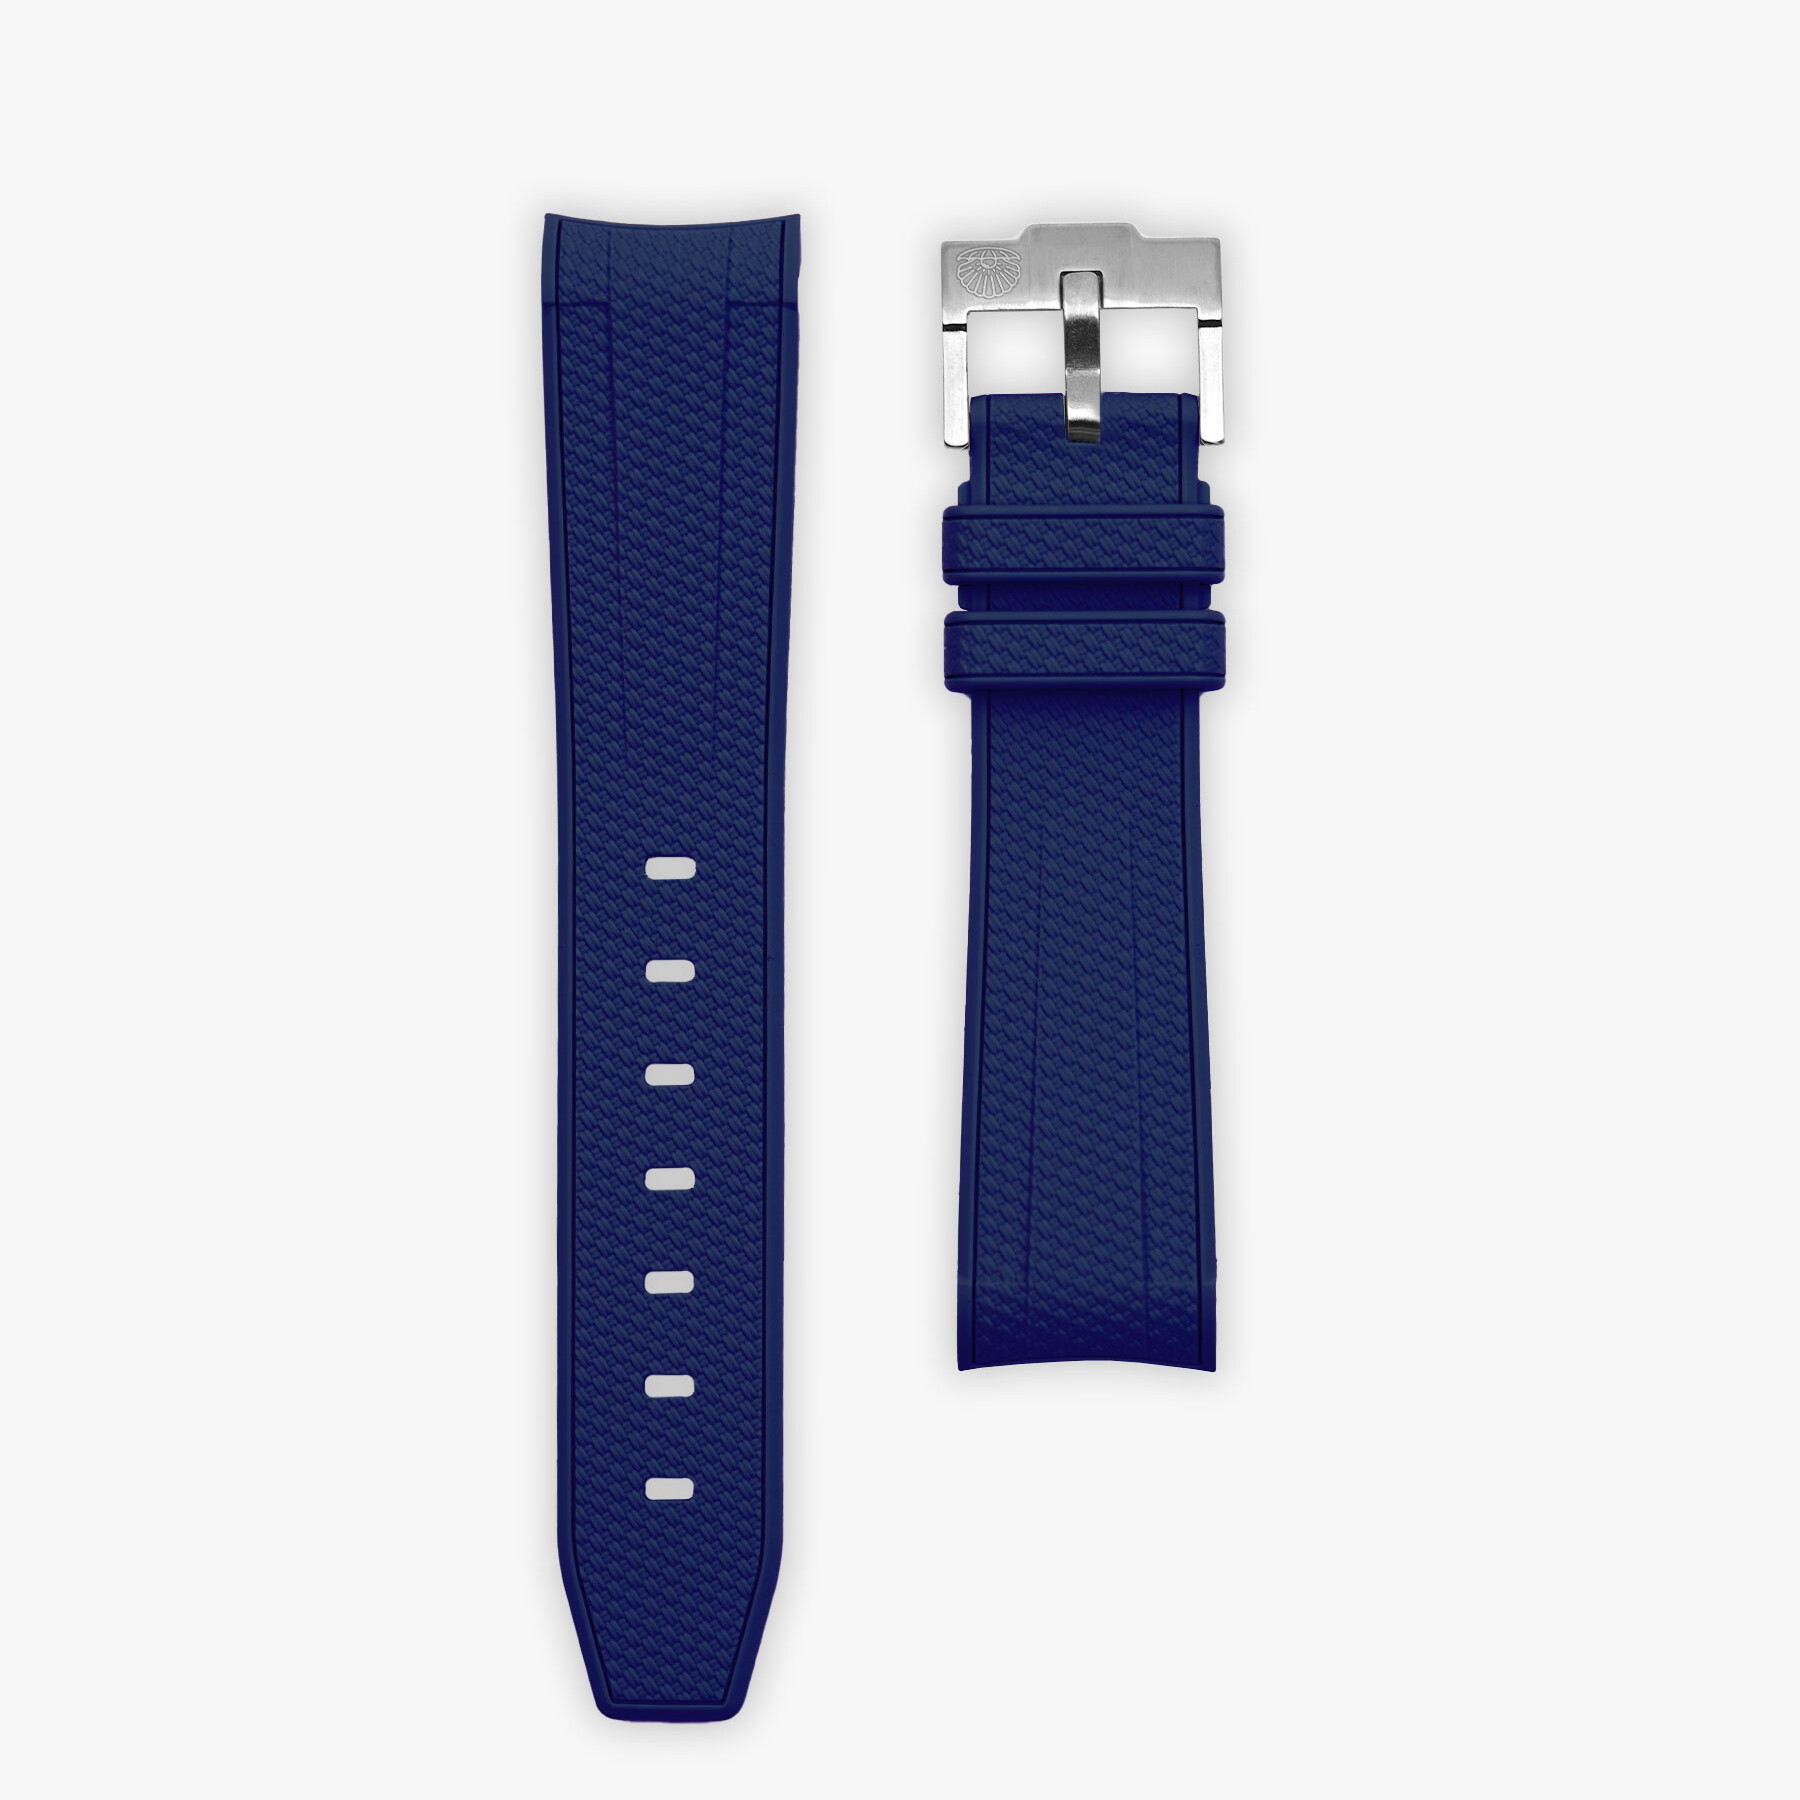 Mission on Earth Rubber Strap - Ocean Navy